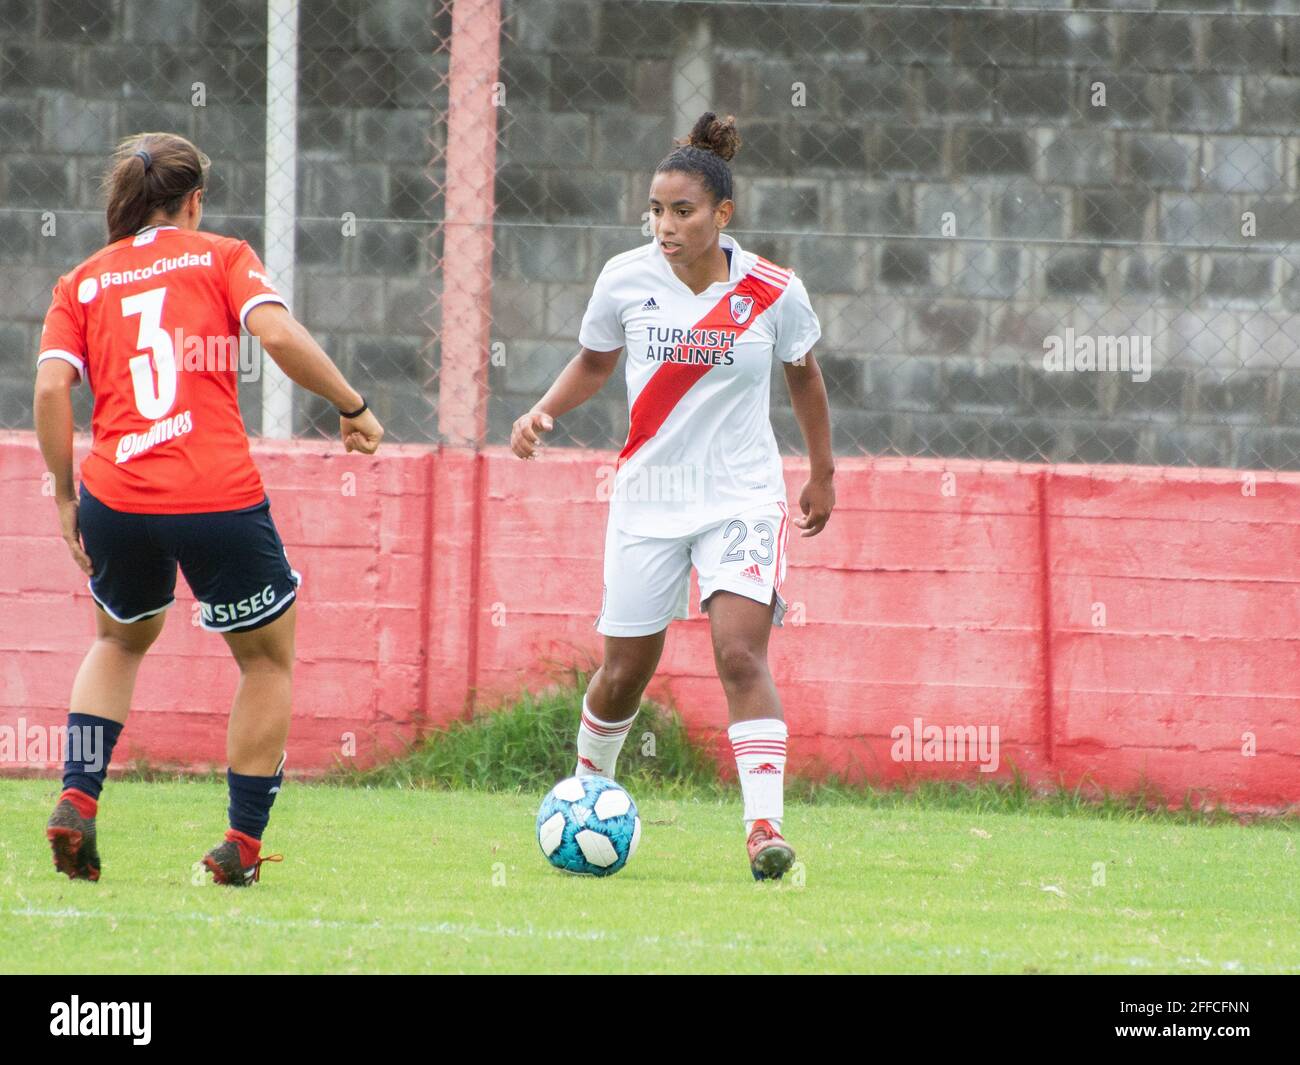 Buenos Aires, Argentina. 24th Apr, 2021. Laura Felipe (#23 River) during the game between Independiente and River Plate at Villa Dominico in Avellaneda, Buenos Aires, Argentina. Credit: SPP Sport Press Photo. /Alamy Live News Stock Photo